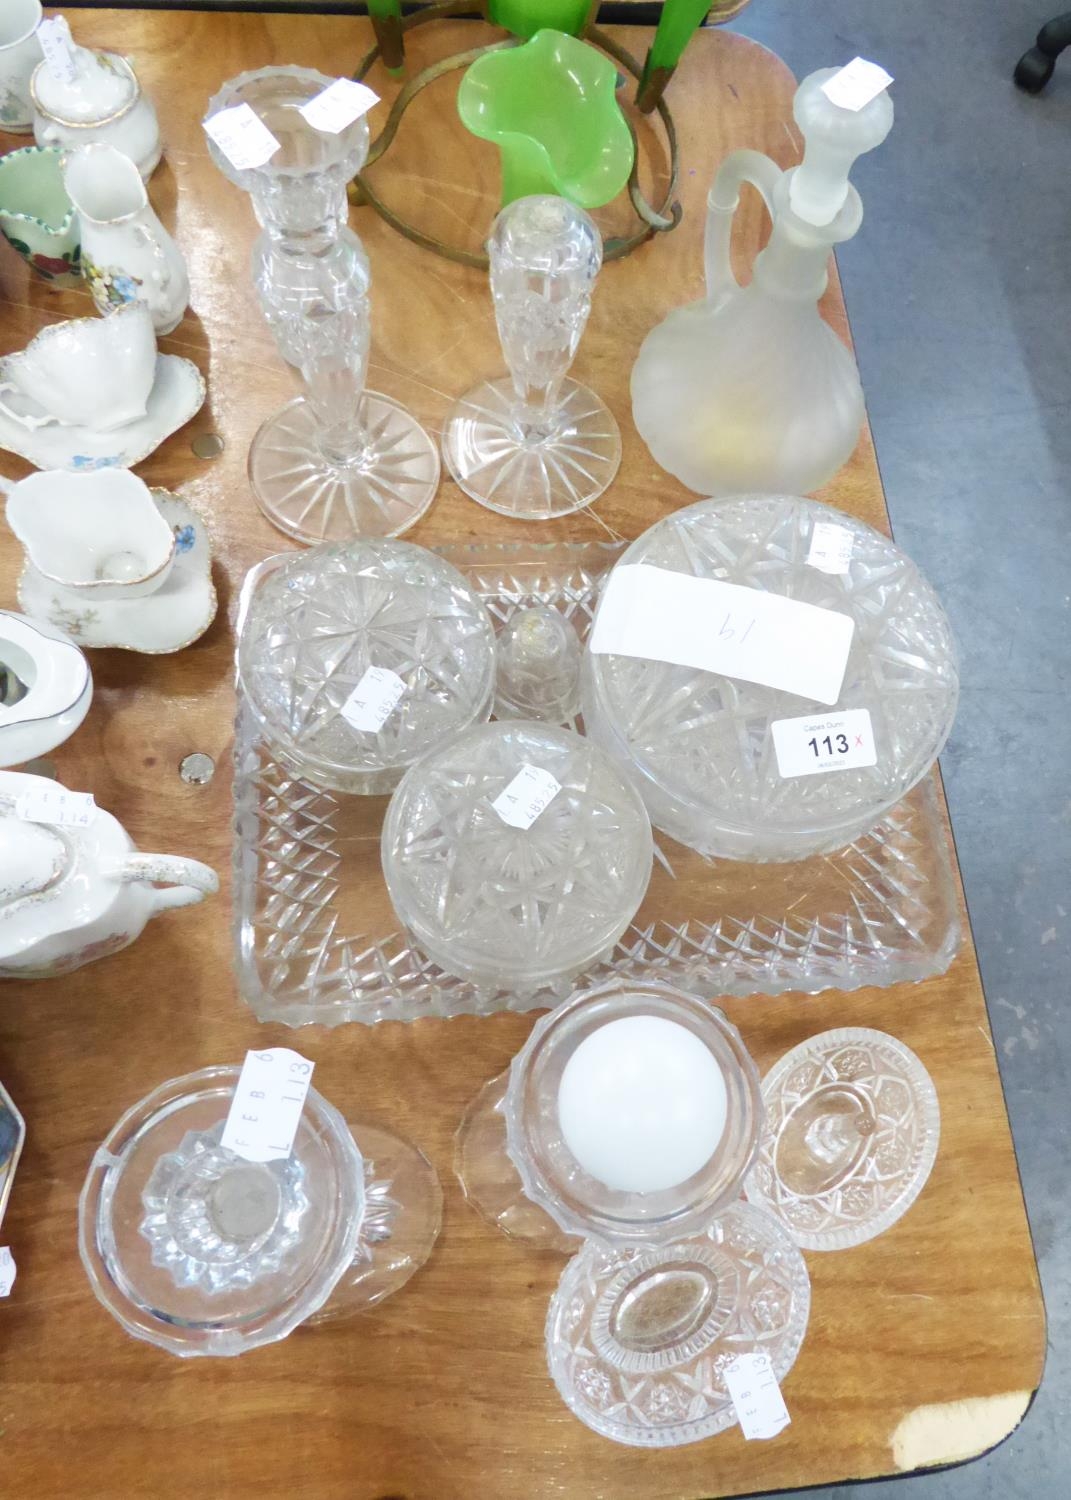 CUT GLASS DRESSING TABLE WARES, INCLUDING ONE CANDLESTICK AND THE OBLONG TRAY